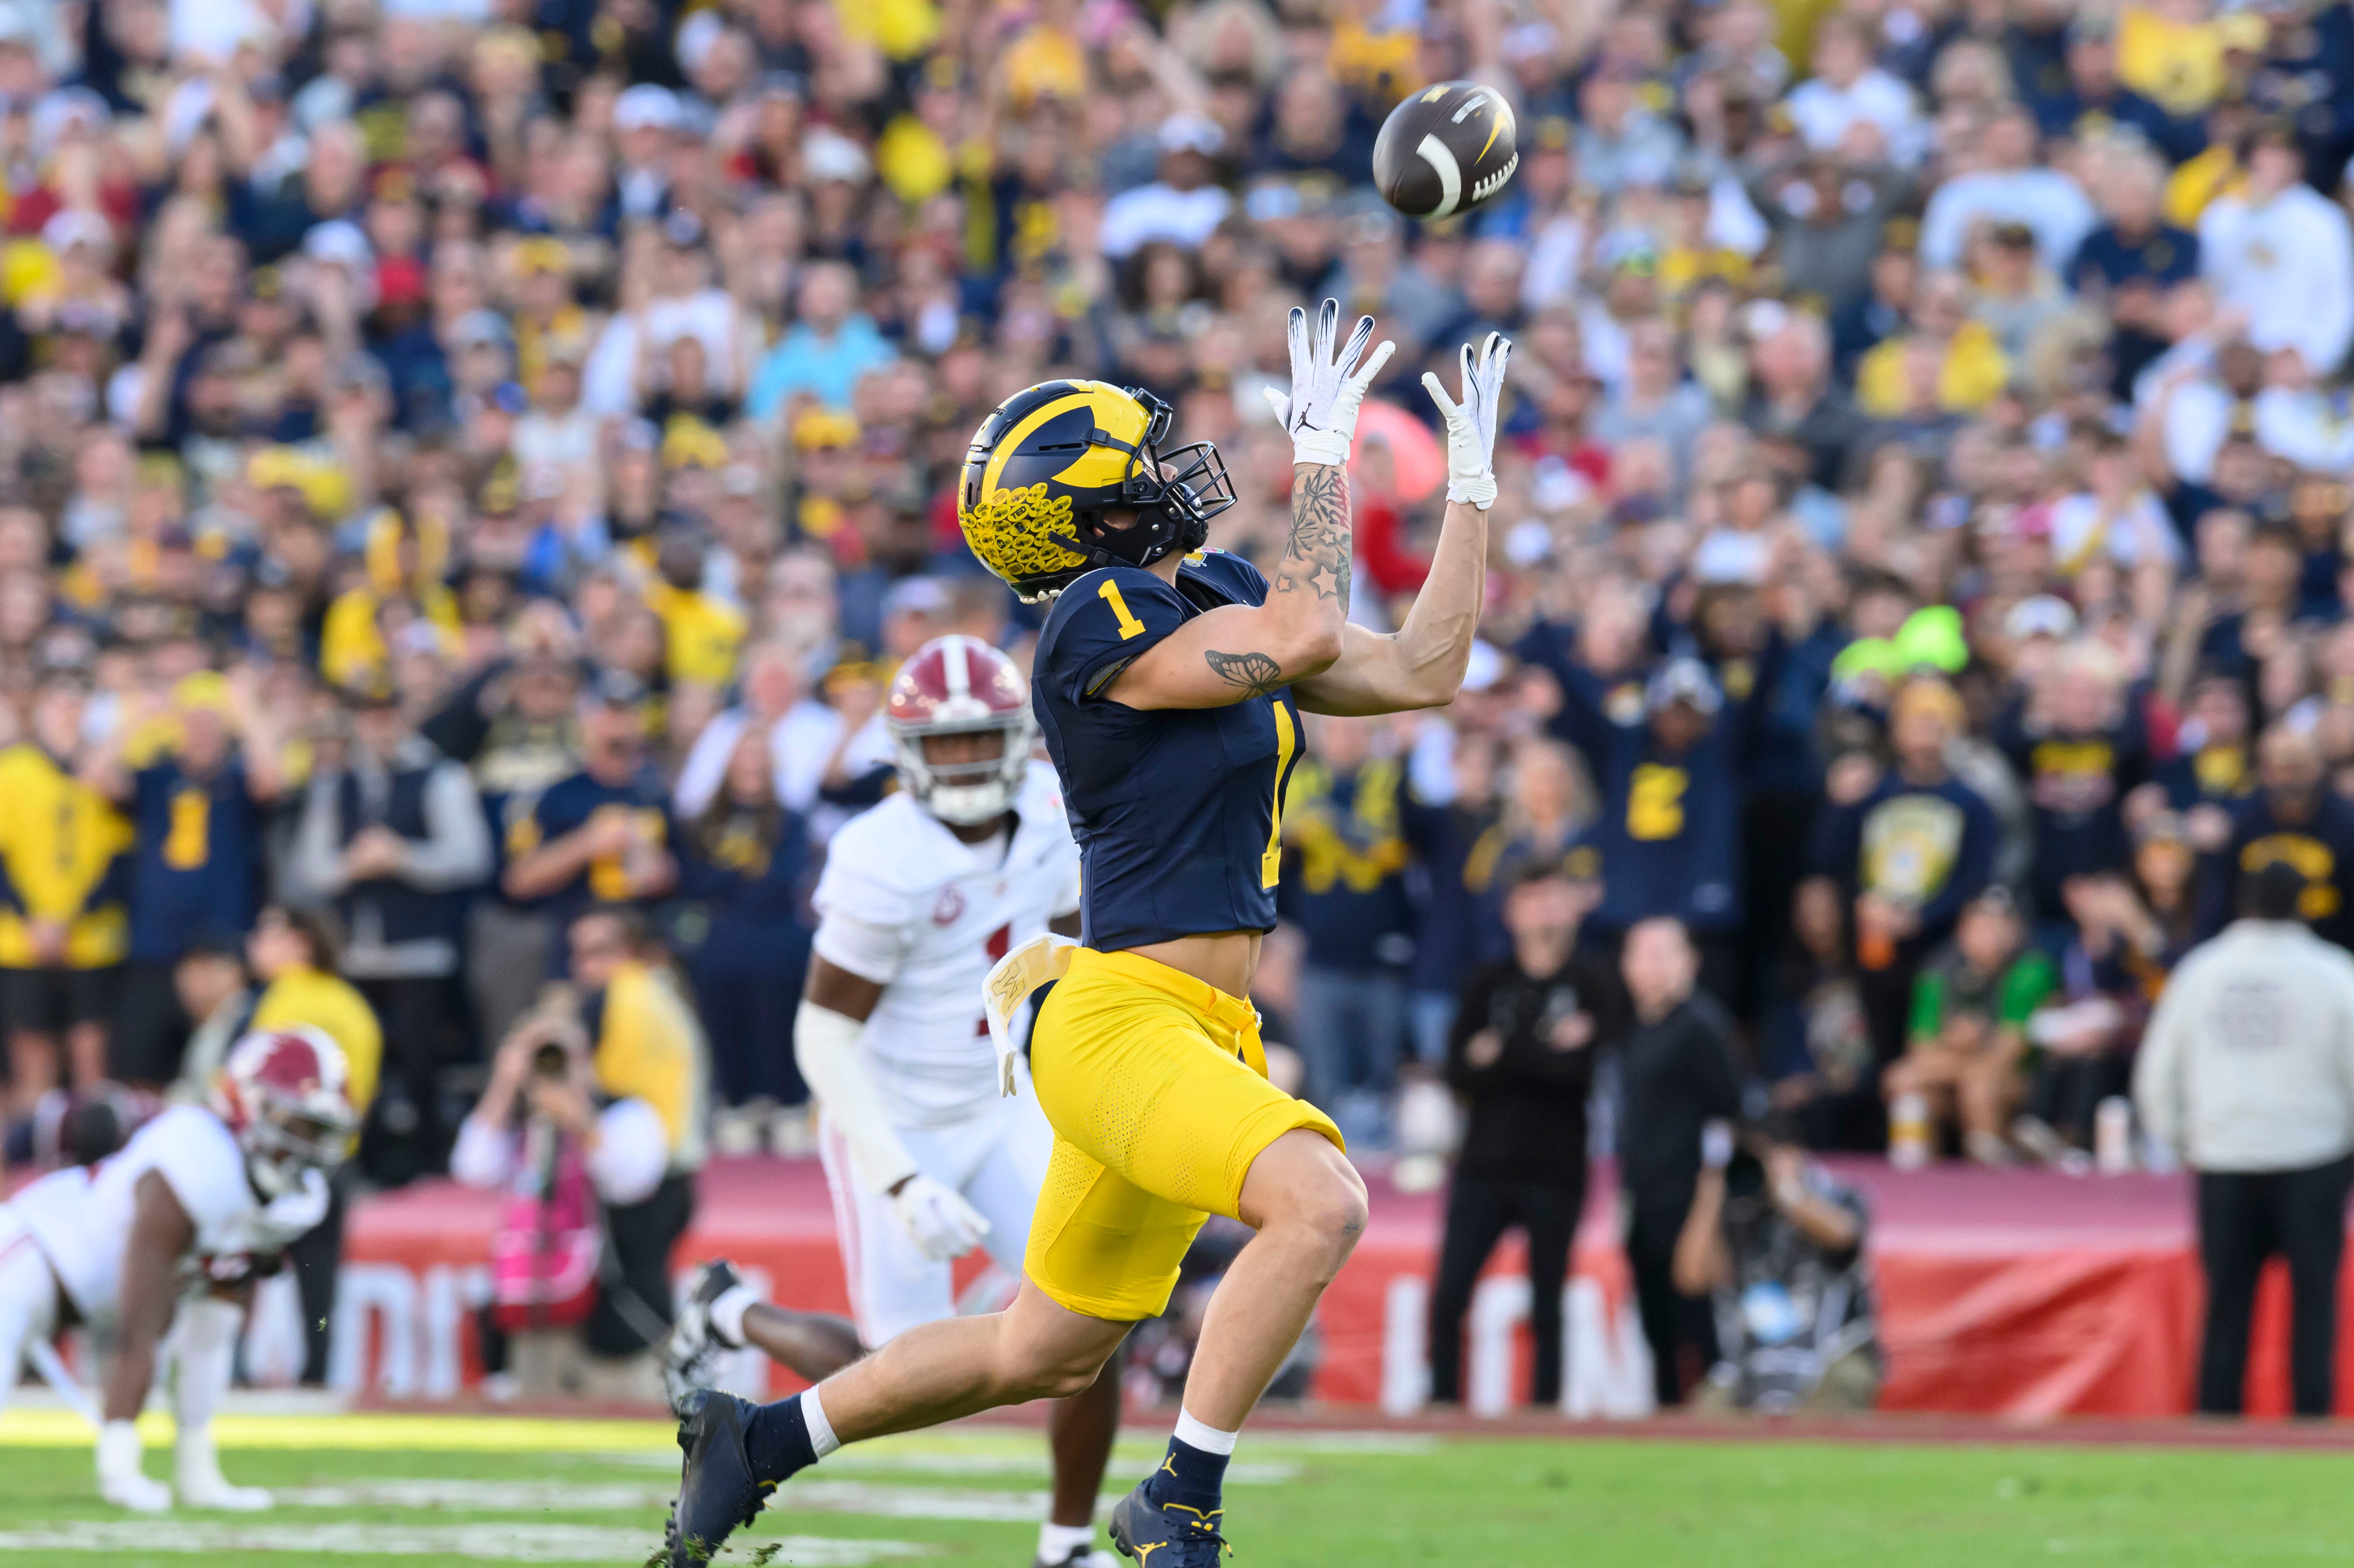 Michigan wide receiver Roman Wilson hauls in a pass for extra yardage during the second quarter of the Rose Bowl, in Pasadena, California, January 1, 2024.